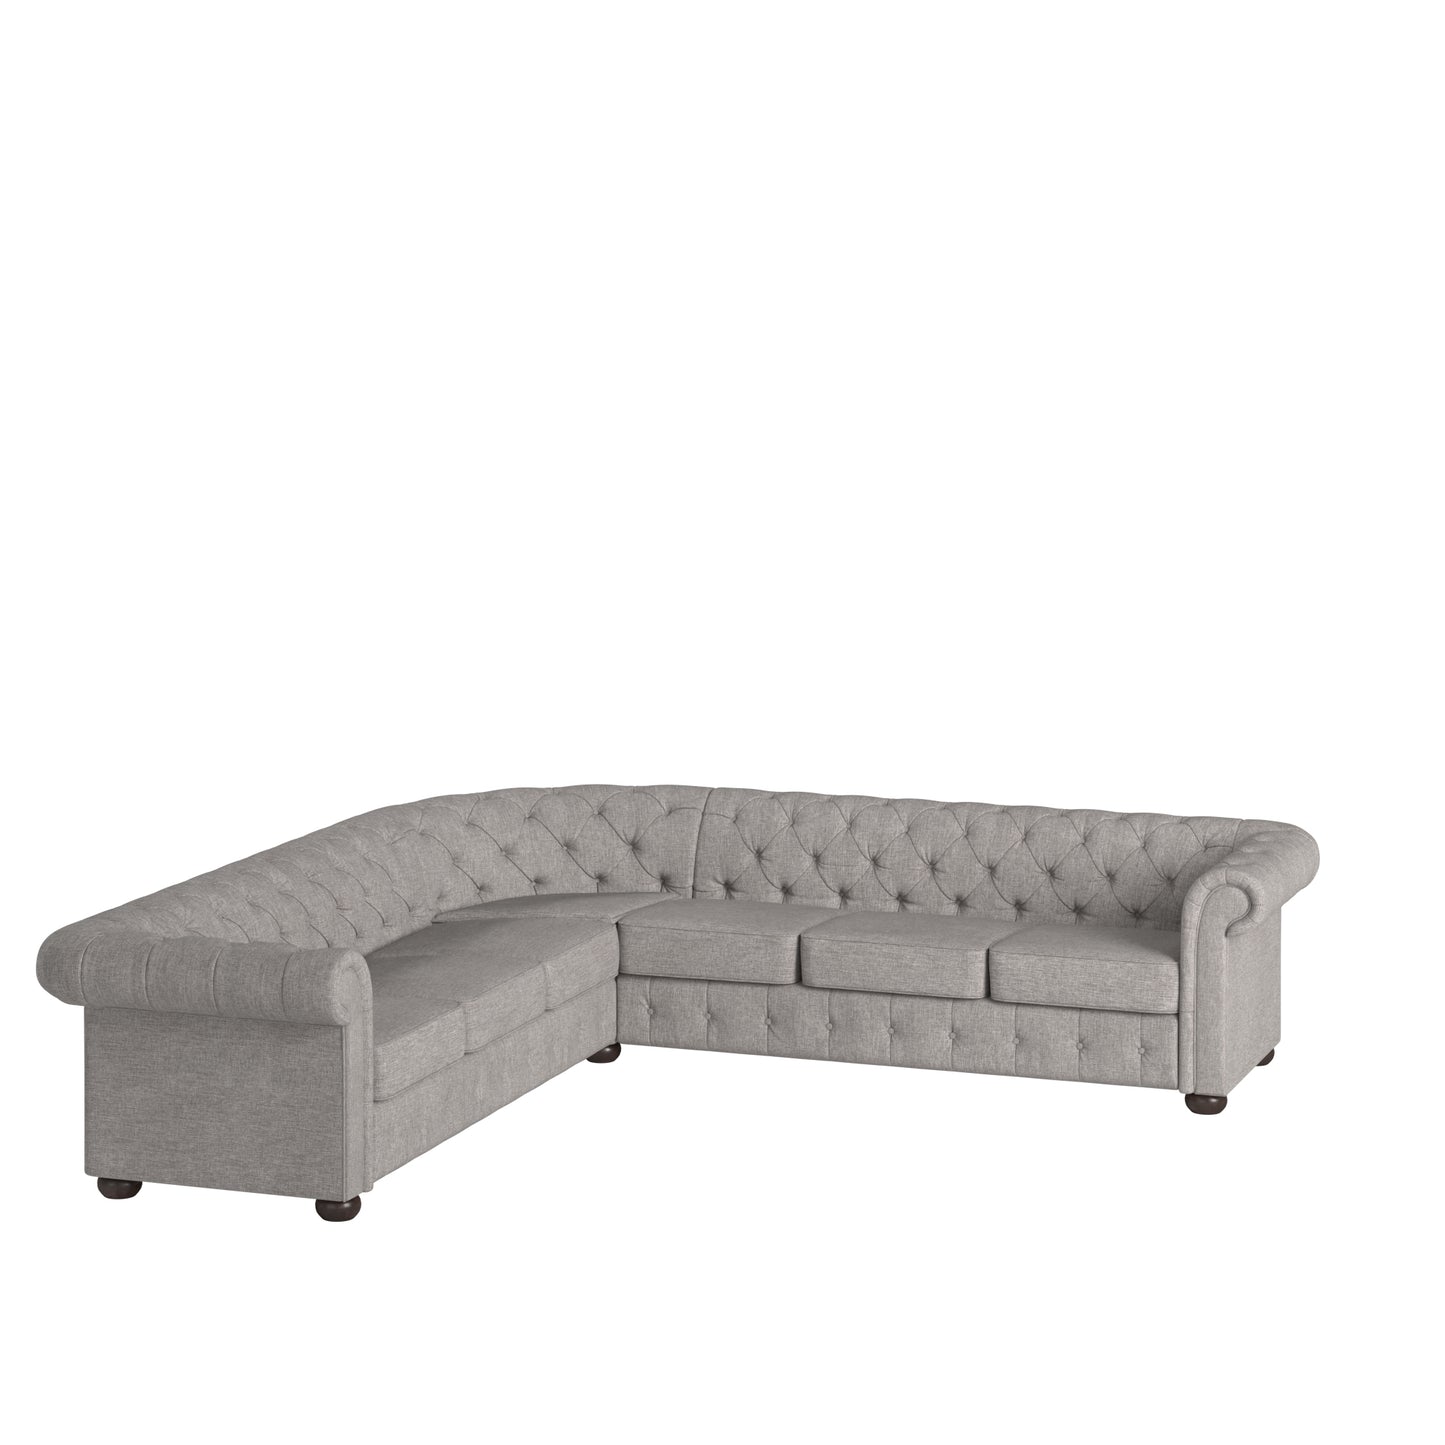 7-Seat L-Shaped Chesterfield Sectional Sofa - Grey Linen